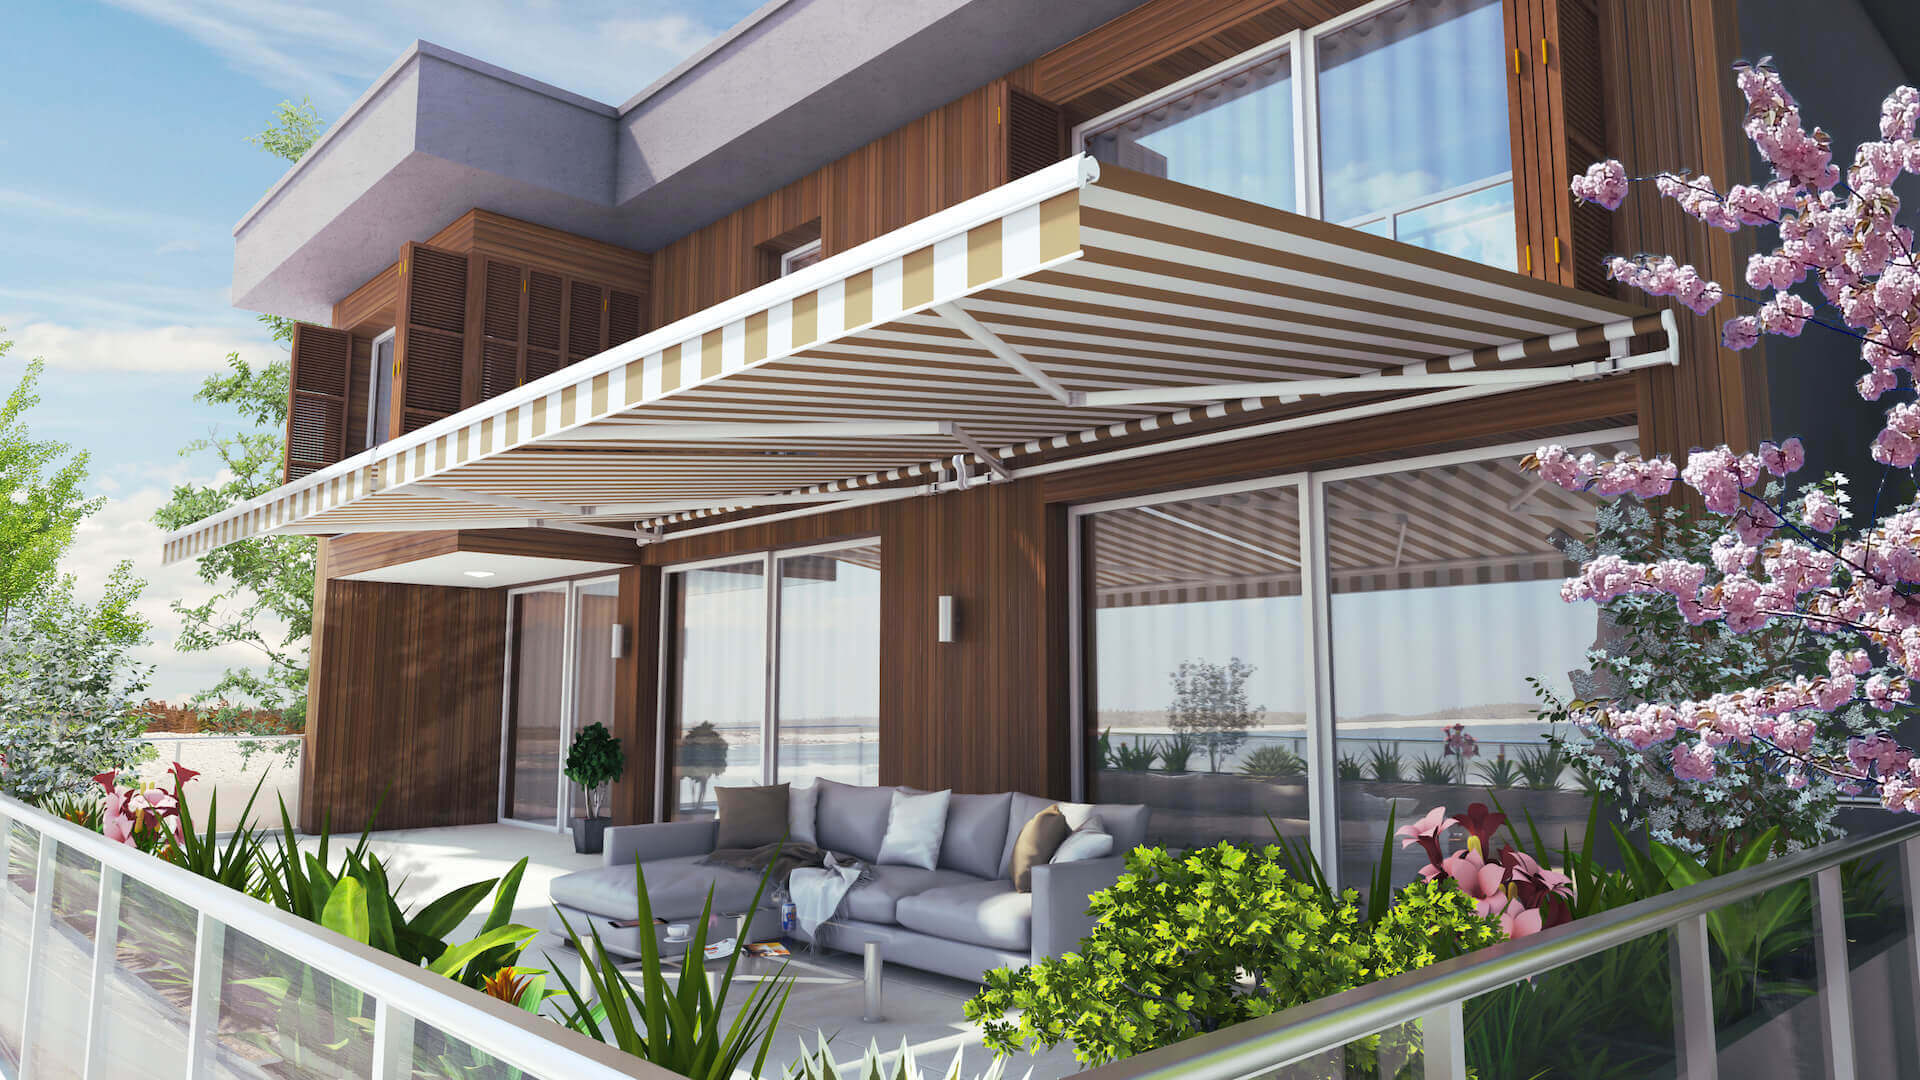 The <em>articulated</em> arm <em>awning</em>  is an ideal shade provider for narrow balconies or patios that can be individually extended.